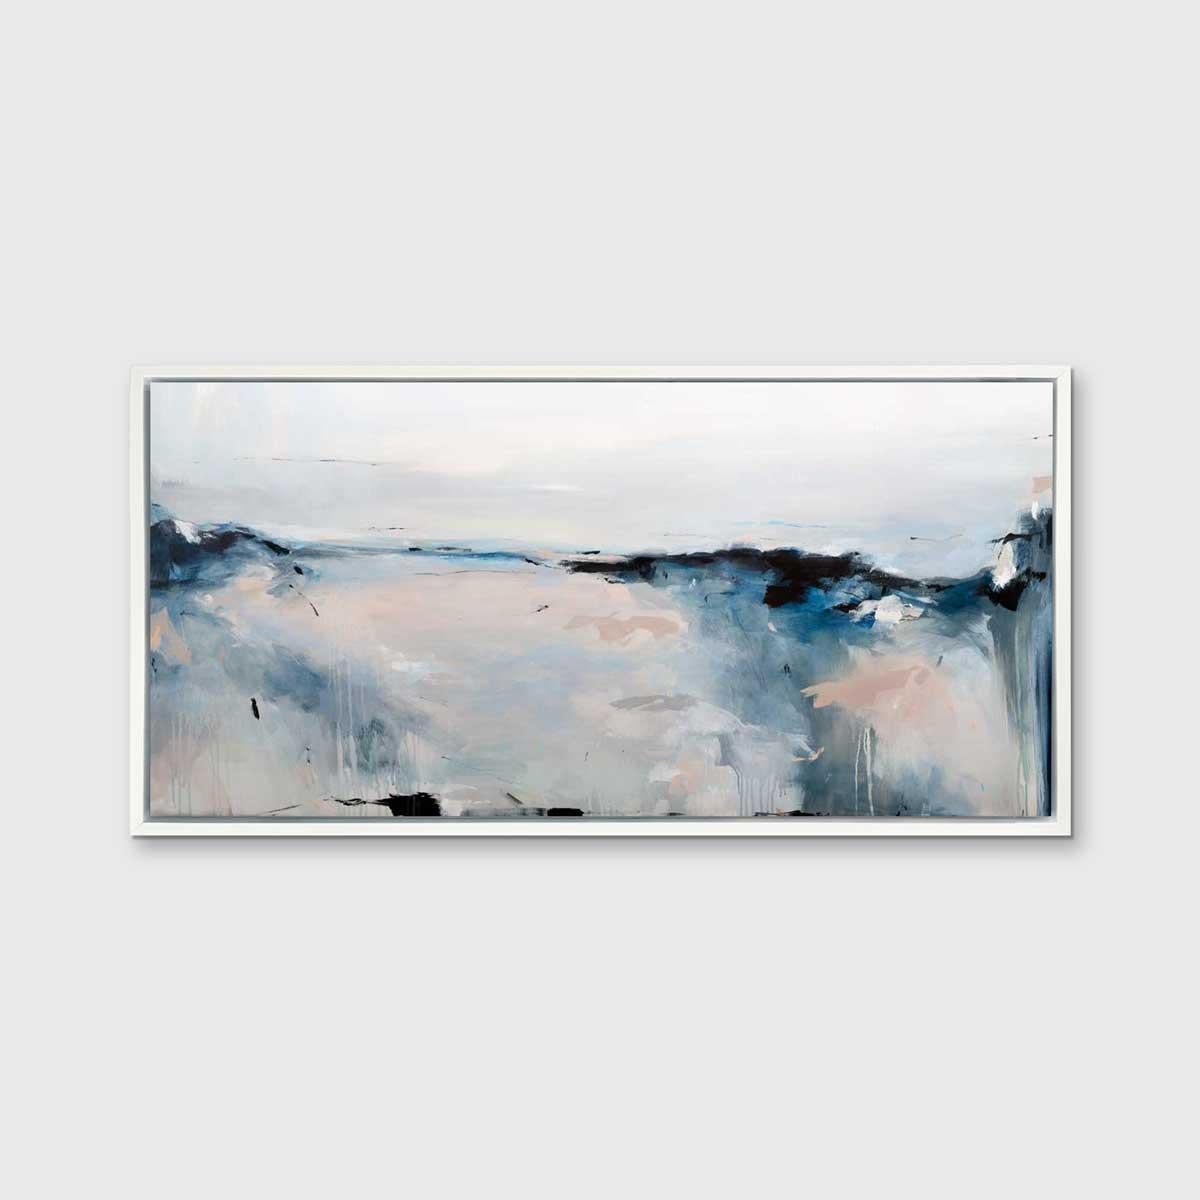 This abstract limited edition print by Kelly Rossetti features a cool palette and an abstracted landscape composition in a horizontal format. The artist's loose, expressive brush strokes come together in deep blue, grey, and pale pink accent tones